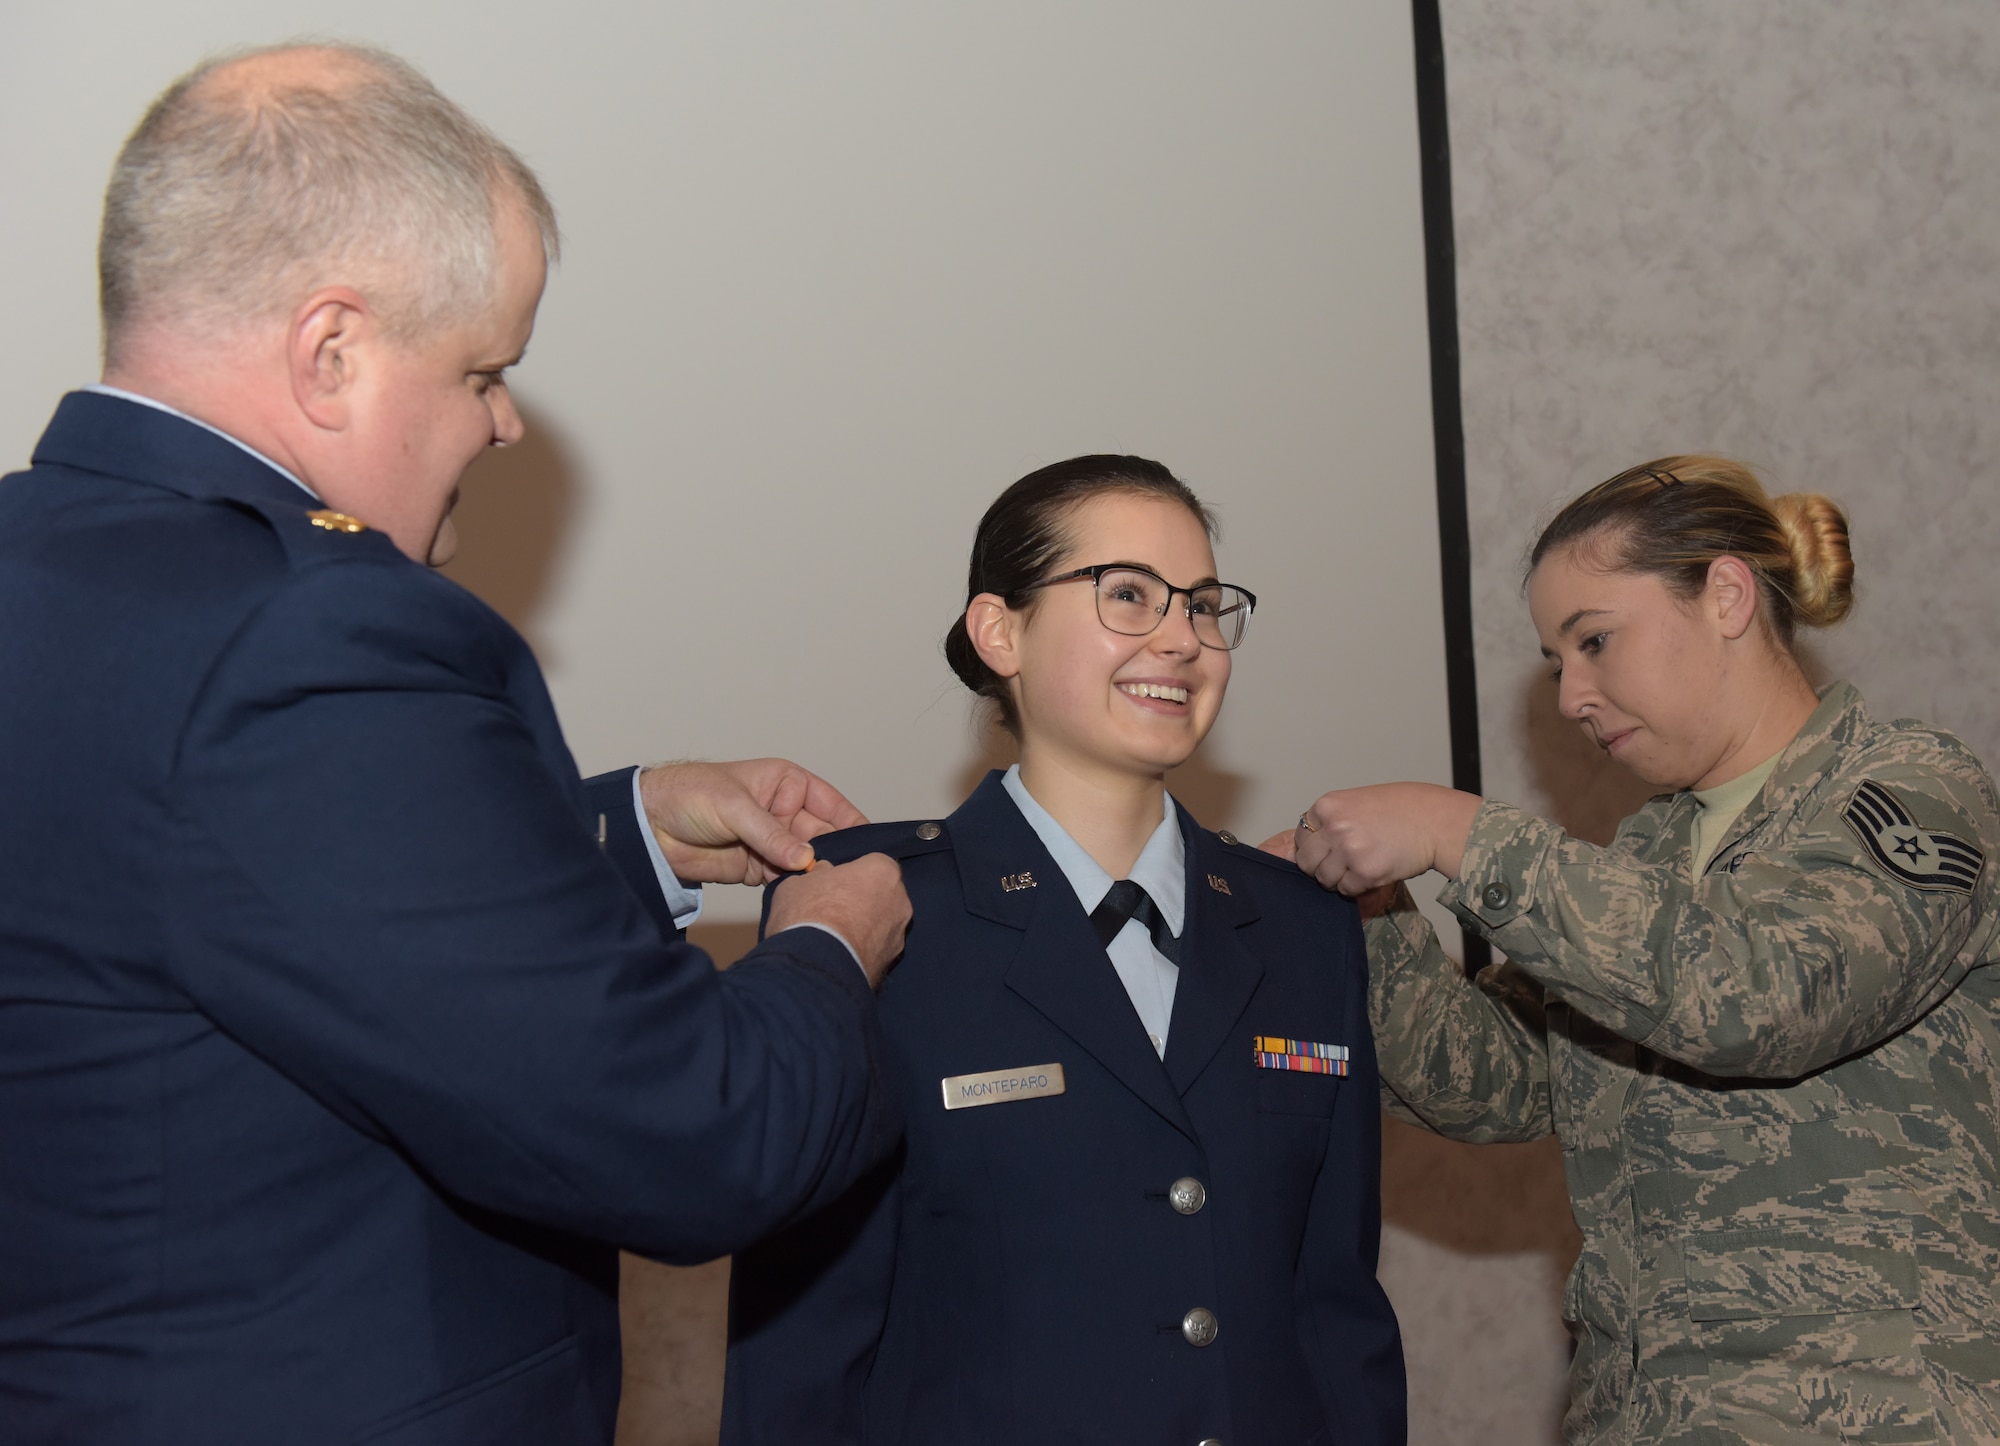 Airman commissions, begins journey to become a doctor